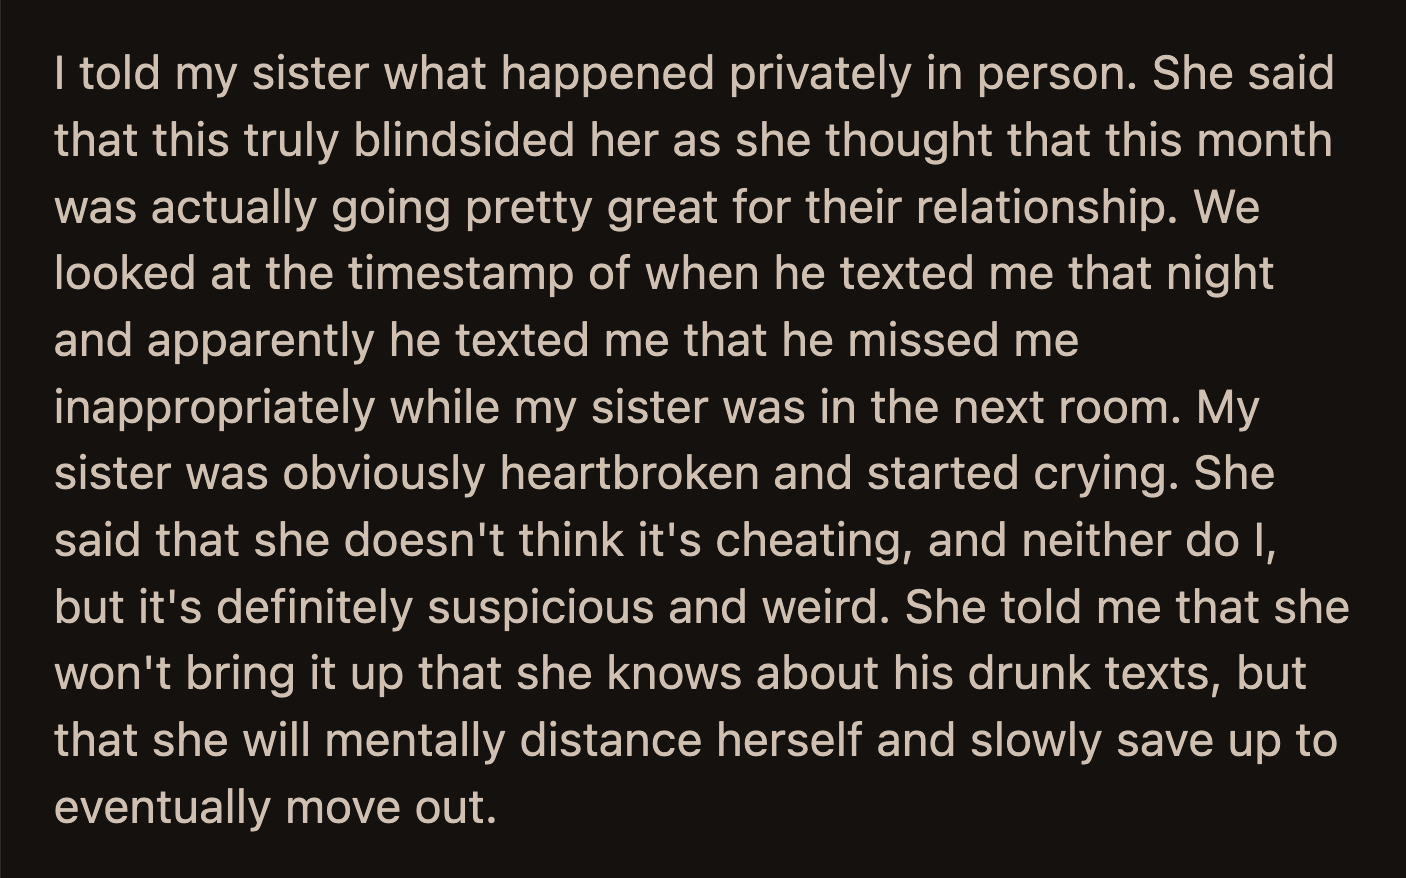 That annoyed OP. He questioned his sister if she loved this guy or if she was afraid to be alone. She said she loved him and was not willing to dump a 5-year relationship over some drunk messages.